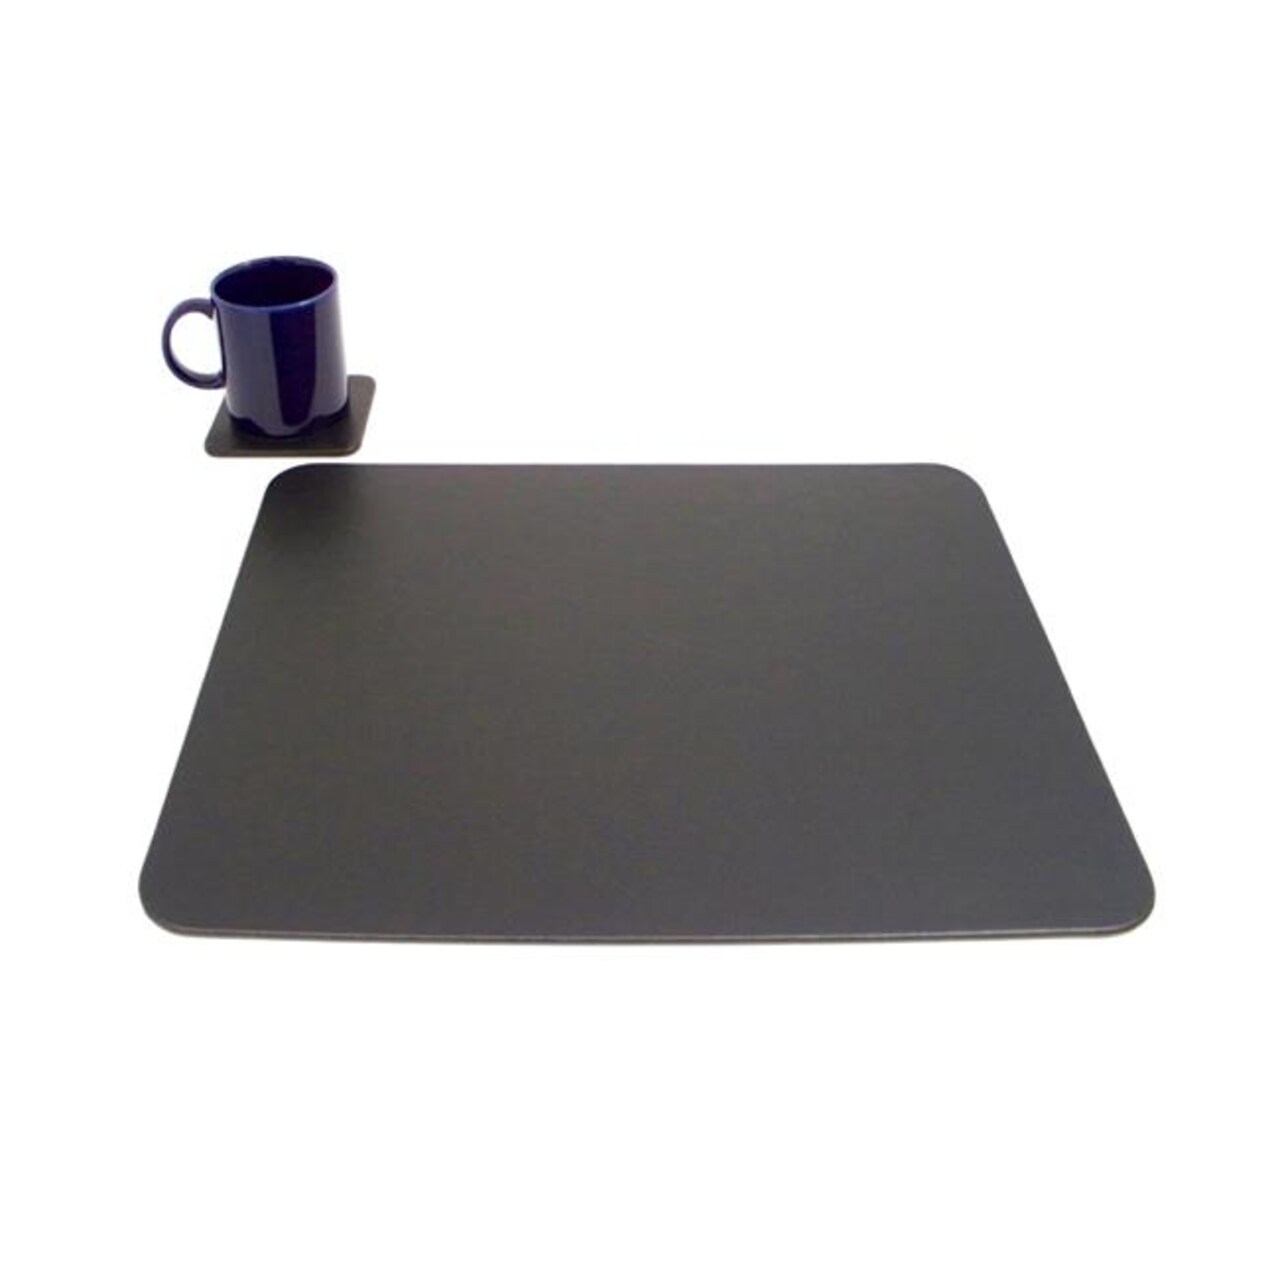 Bey-Berk International D433 14 x 17 in. Leather Conference Table Pad with Single Coaster - Black